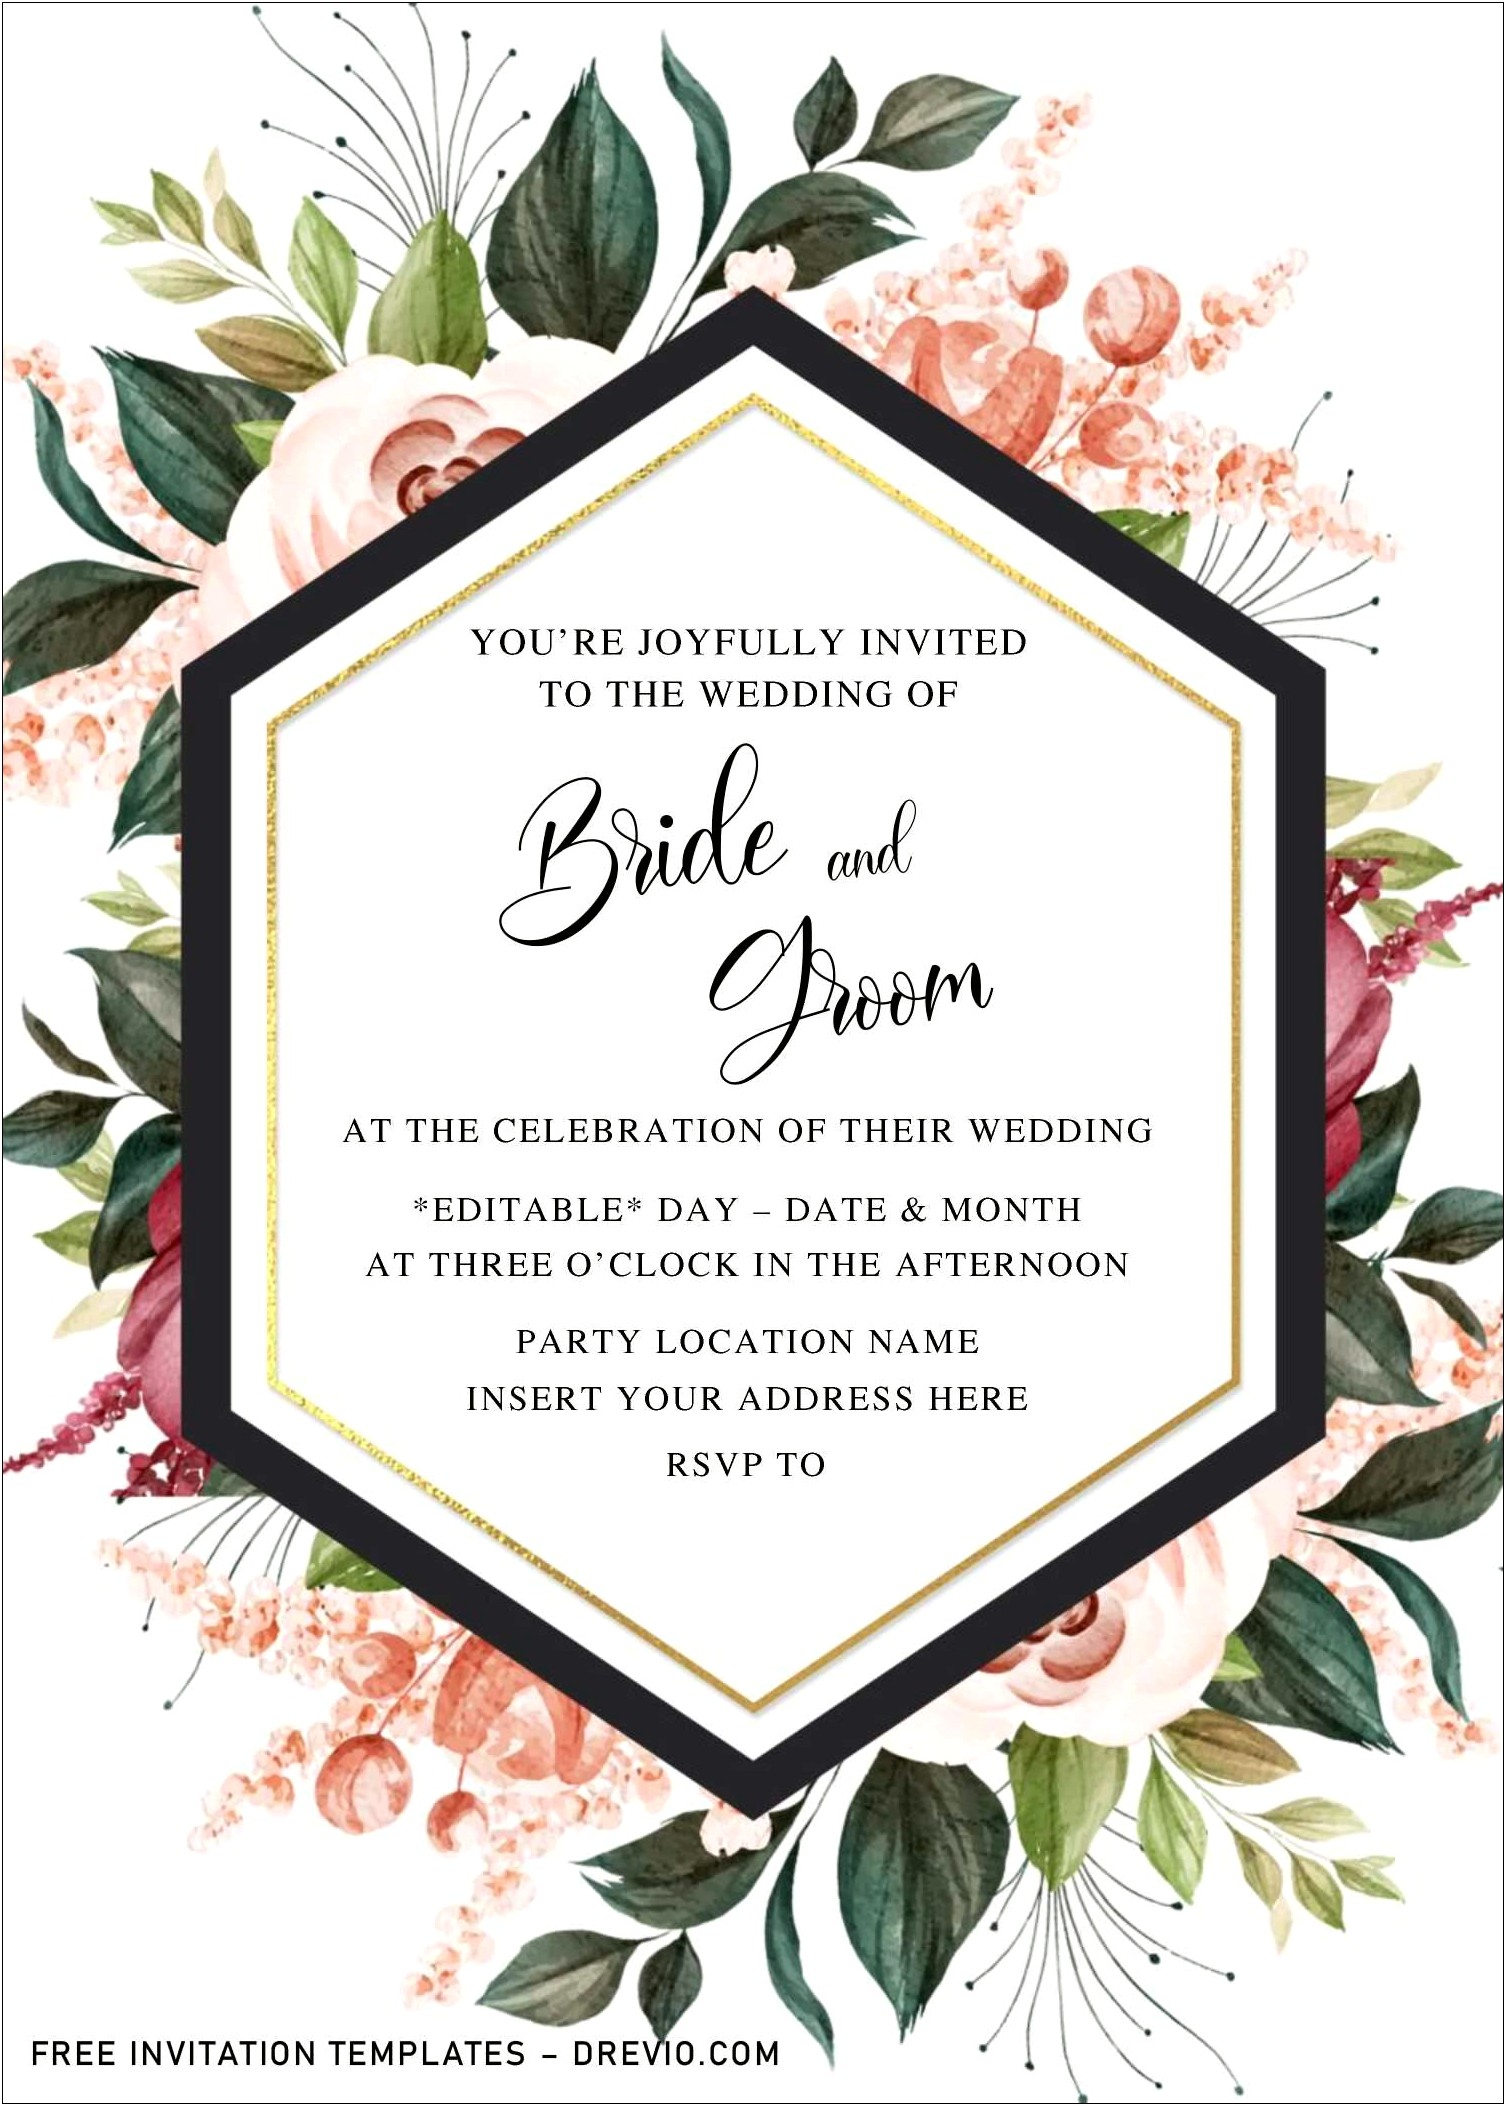 Email Invitation For Wedding Free Download